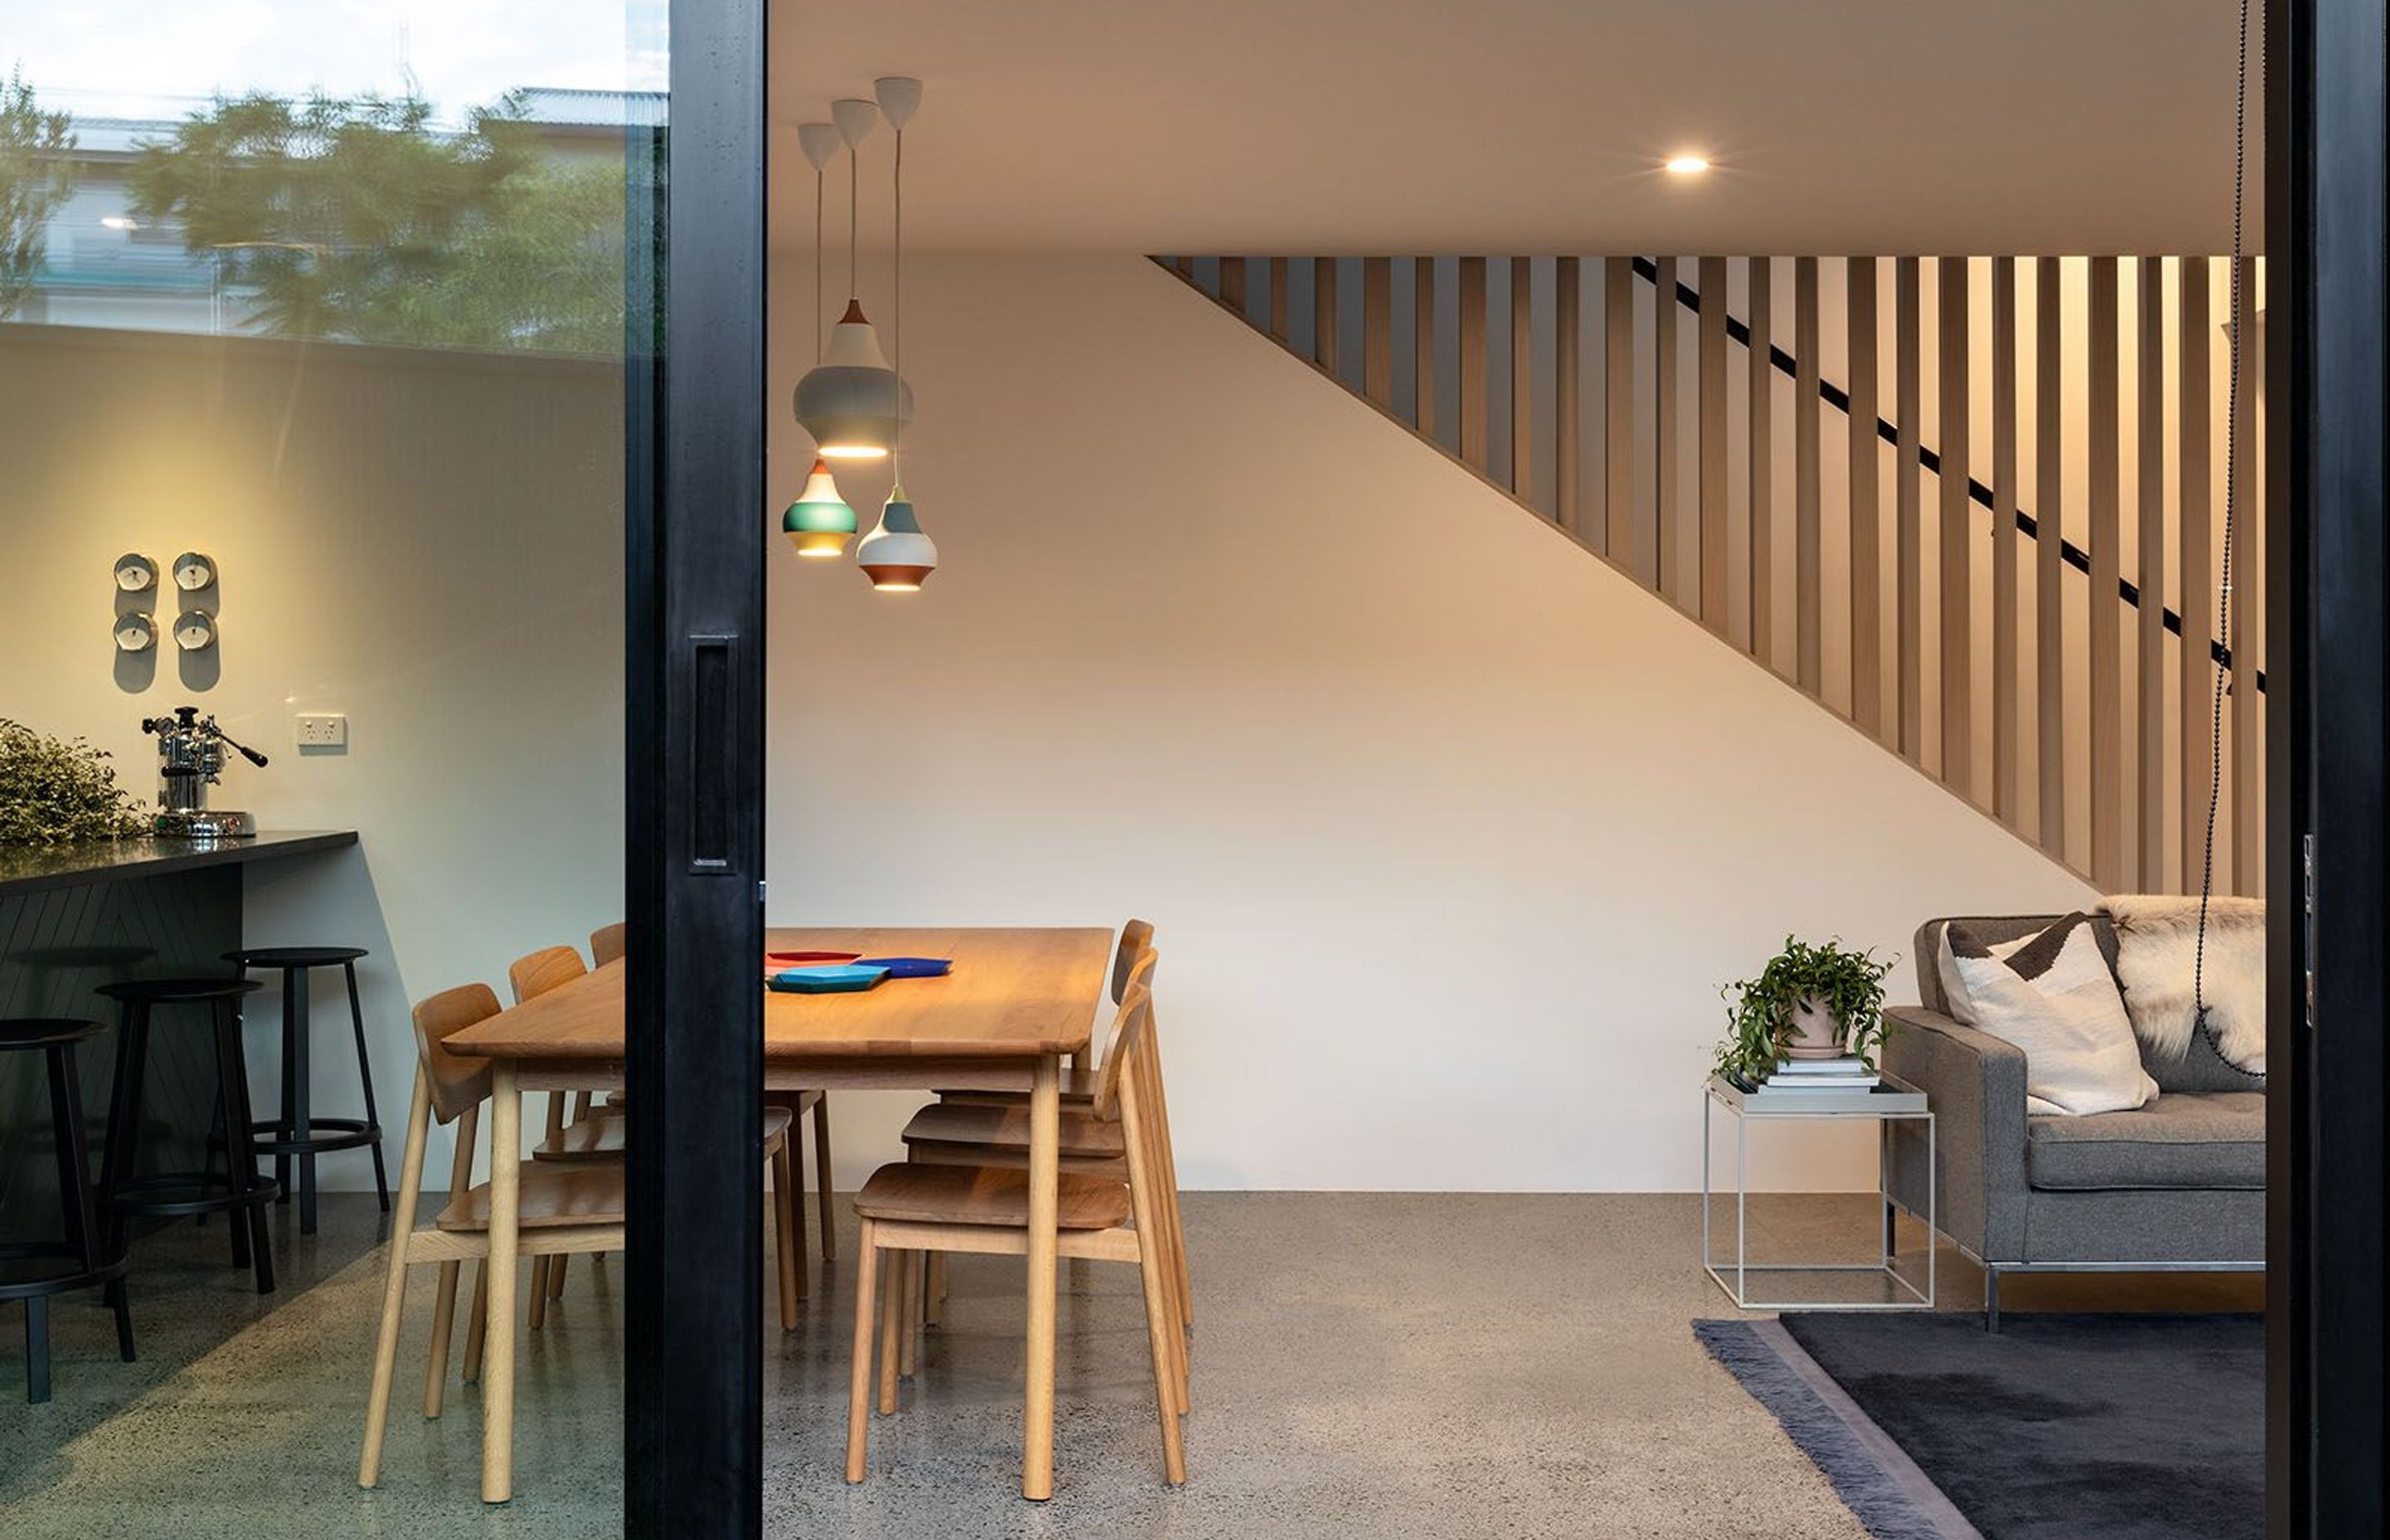 Kate Rogan was both the client and architect of her own home "Black Bird" in Grey Lynn; she and Eva are both currently in the throes of building their own homes again.